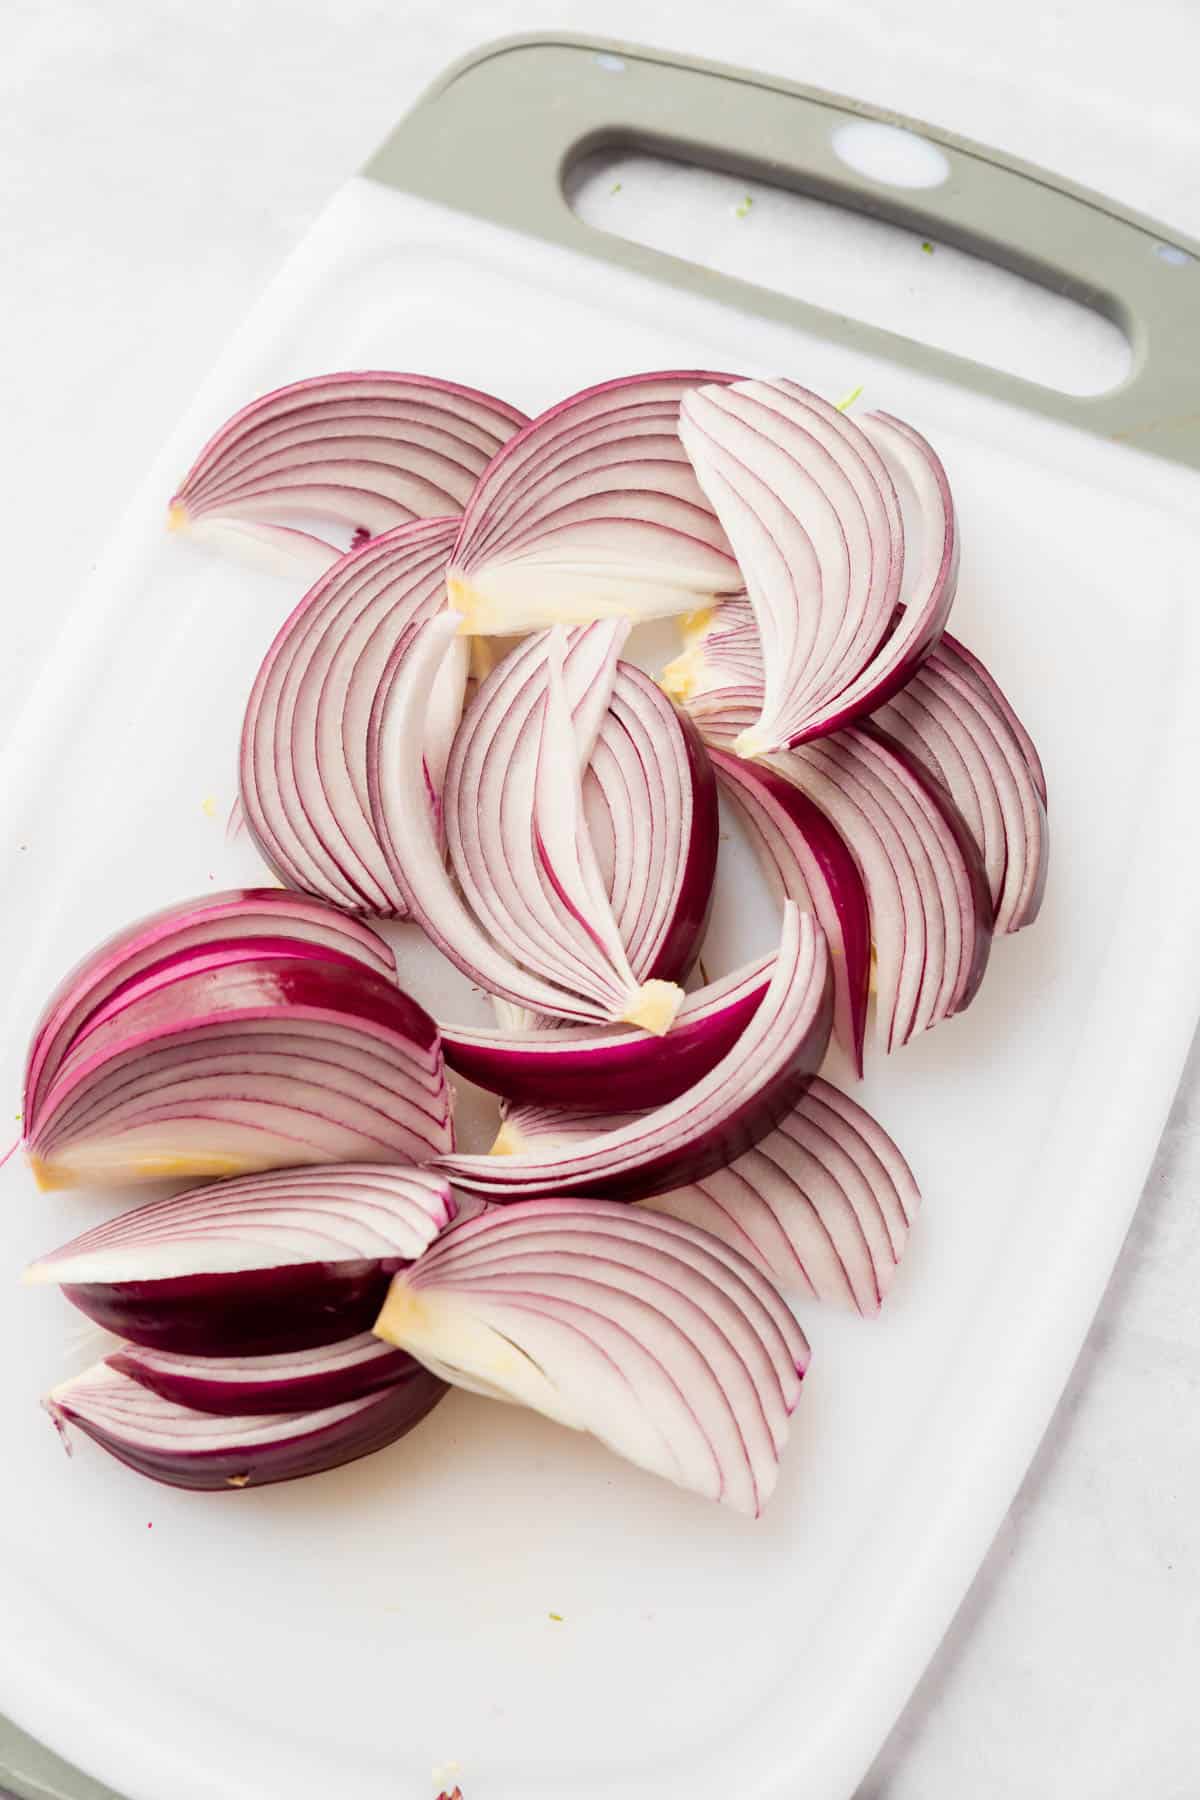 Red onion sliced on a white cutting board.